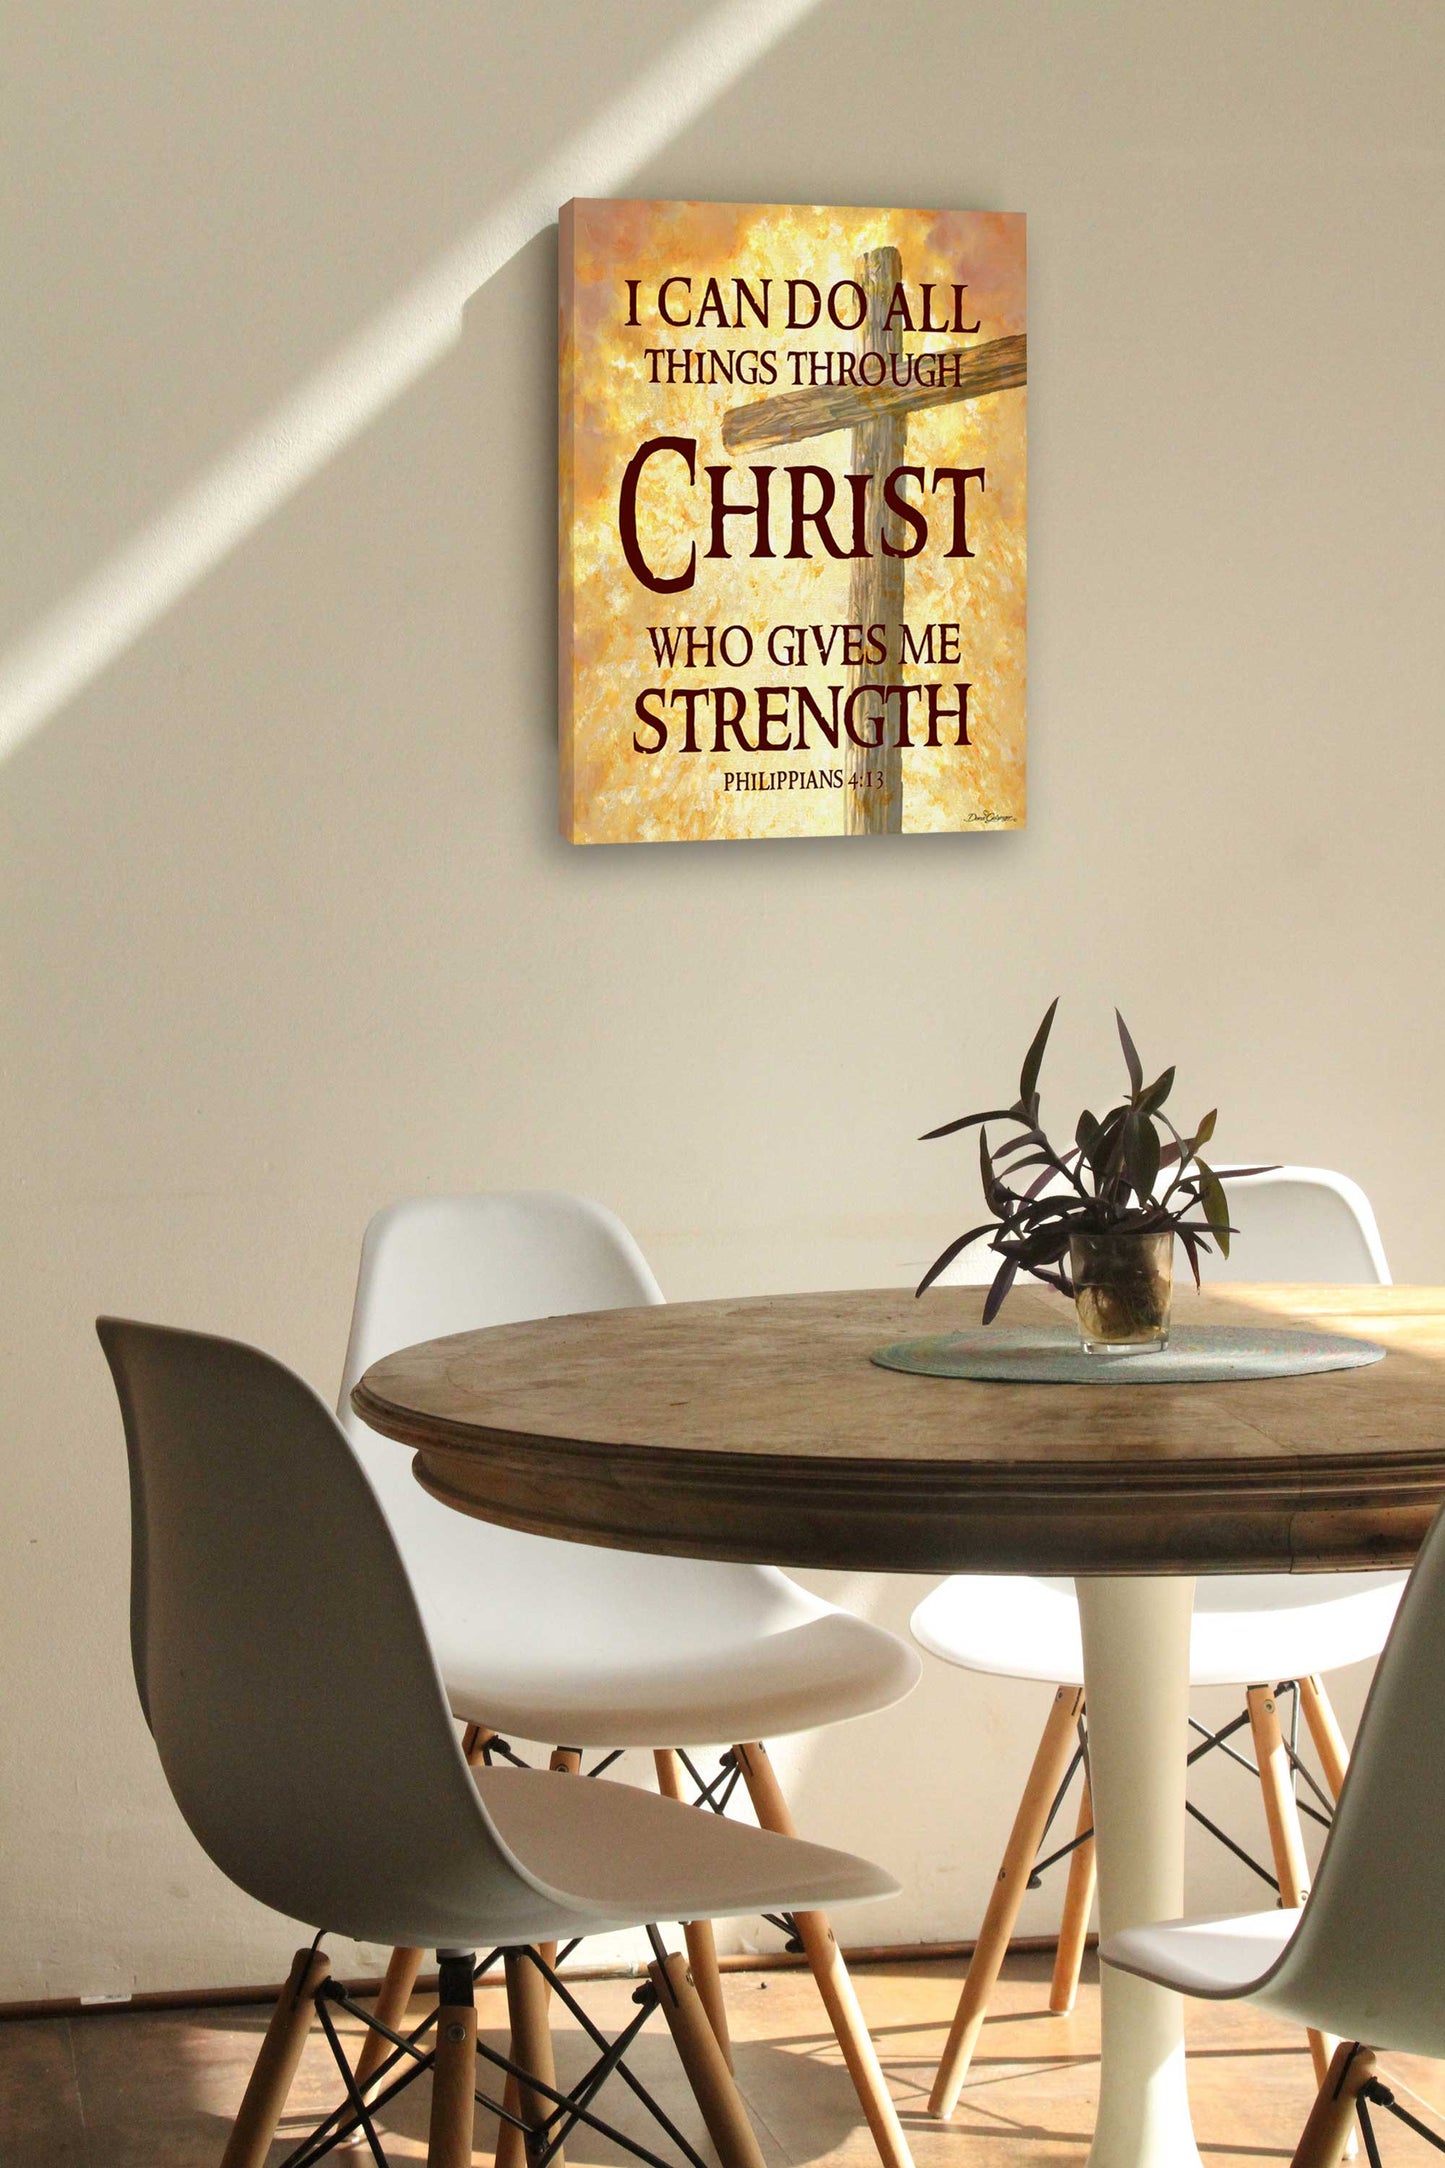 All Things Through Christ Canvas Wall Art - Christian Wall Decor - Religious Gift